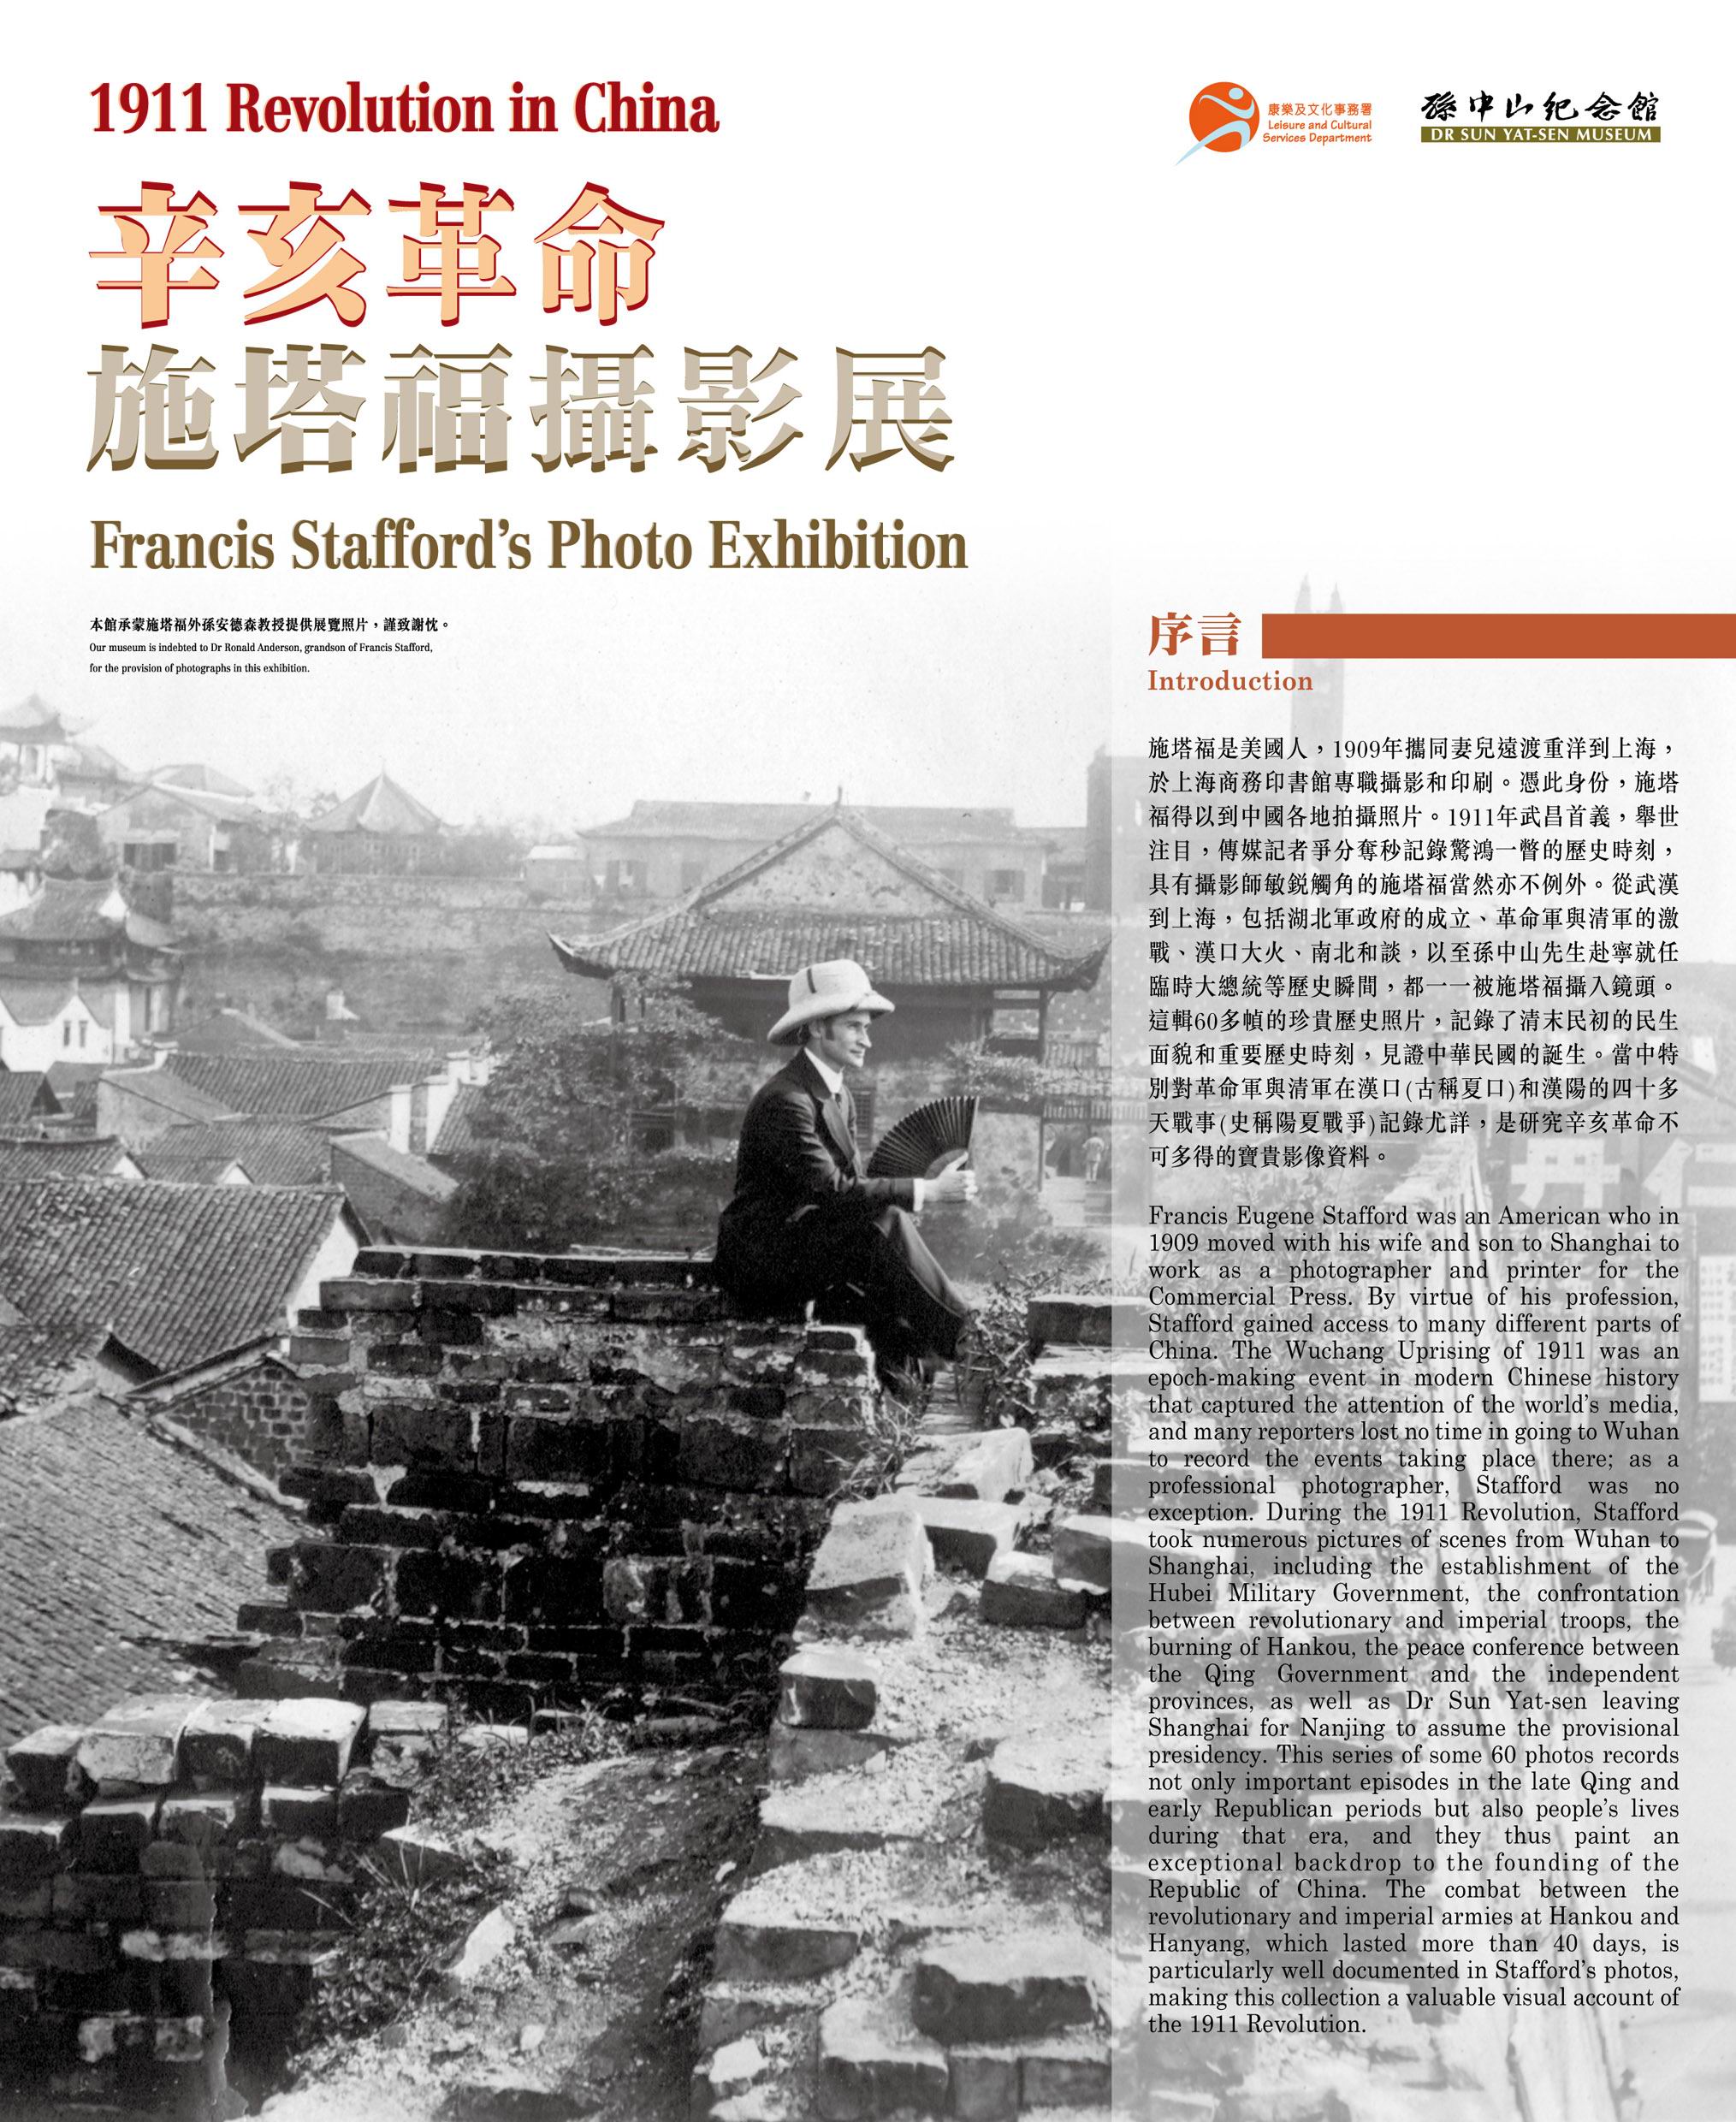 '1911 Revolution in China: Francis Stafford's Photo Exhibition' exhibition panels